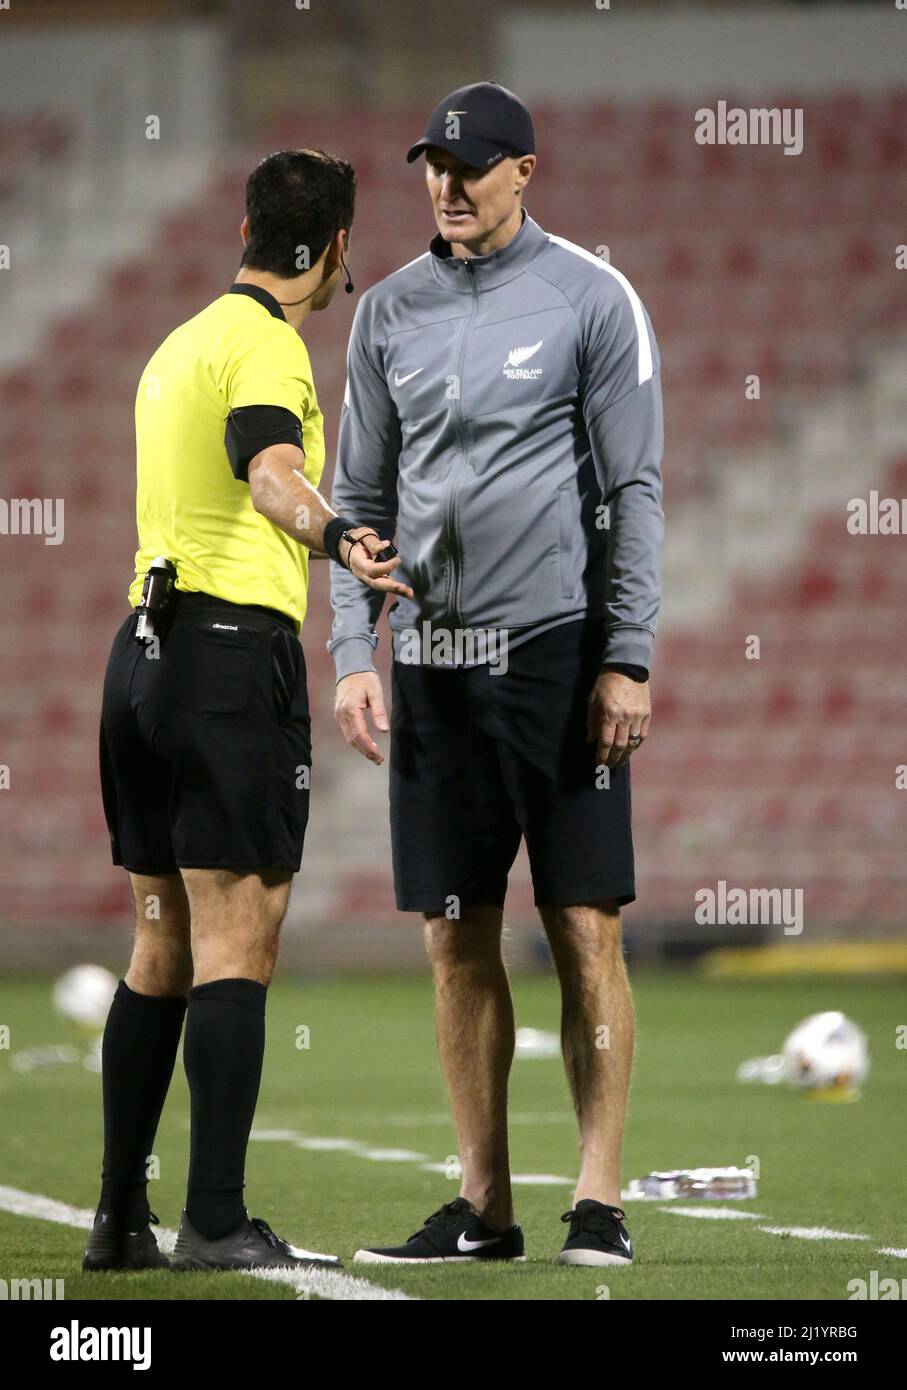 DOHA, QATAR - MARCH 27: Referee Abdulrahman Al Jassim of Qatar argues with Danny Hay head coach of New Zealand ,during the FIFA World Cup Qatar 2022 qualification match between New Zealand and Tahiti at Grand Hamad Stadium on March 27, 2022 in Doha, Qatar. (Photo by MB Media) Stock Photo